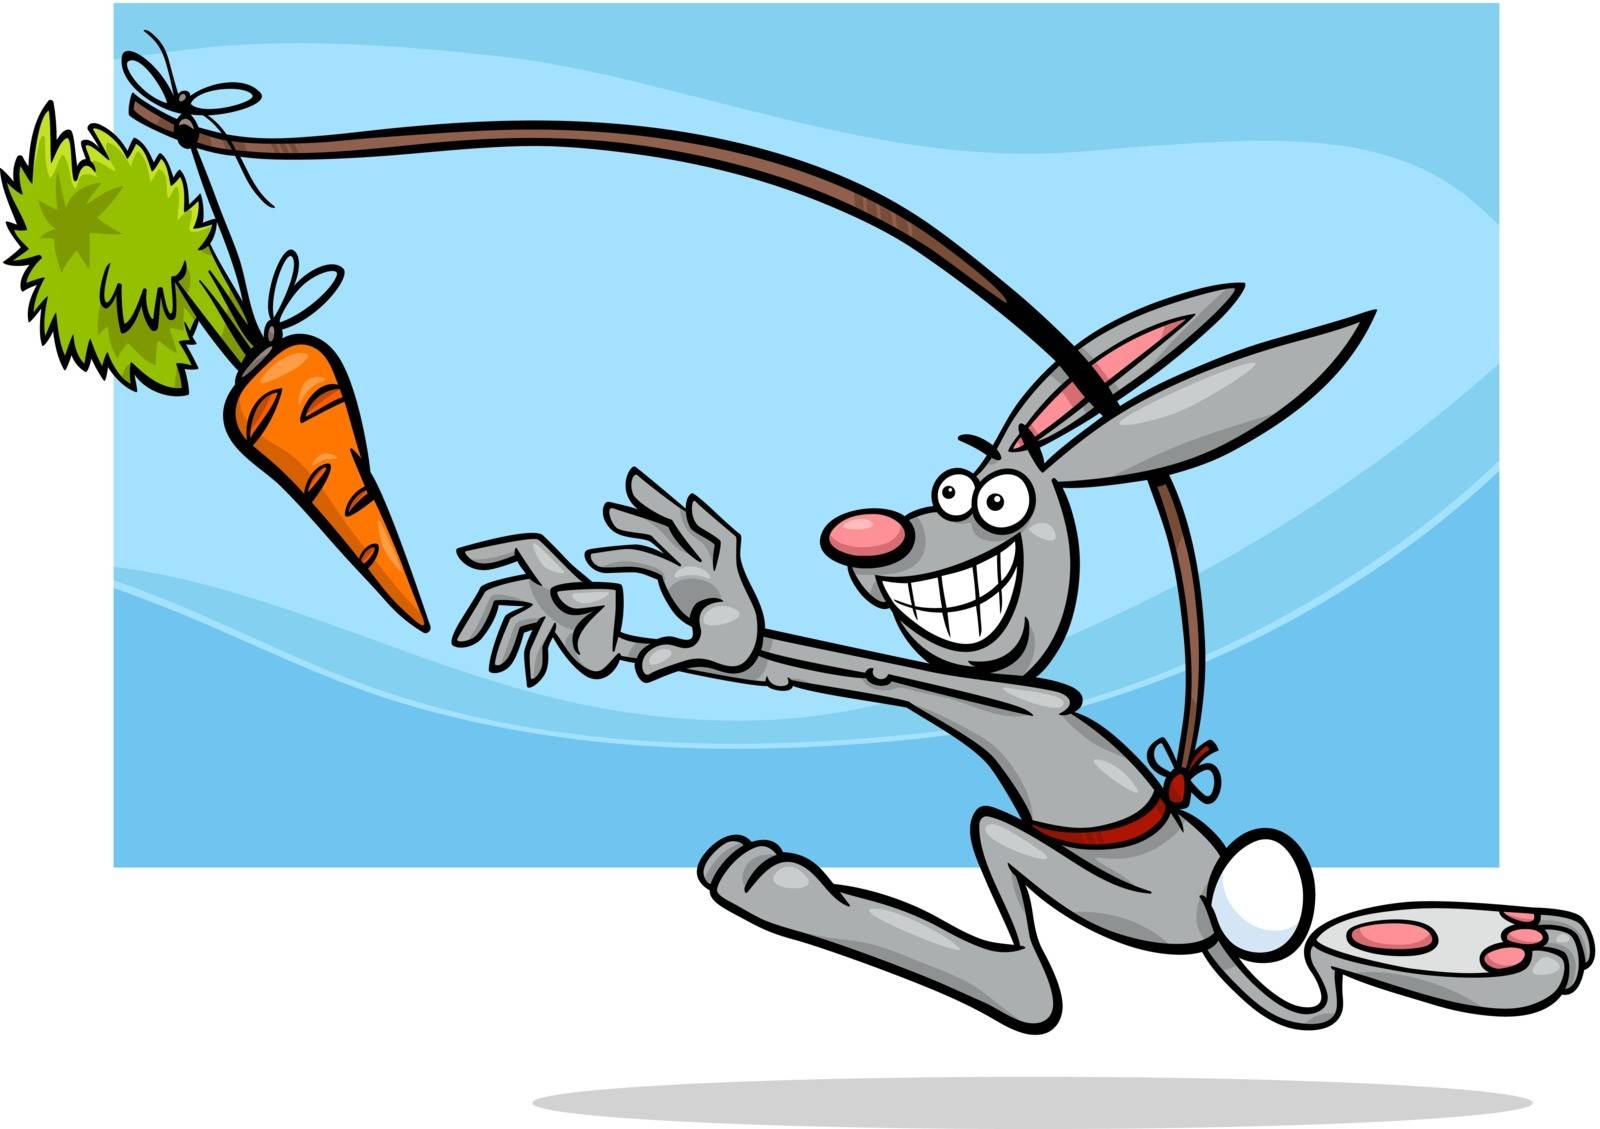 Cartoon Humor Concept Illustration of Dangling A Carrot Saying or Proverb